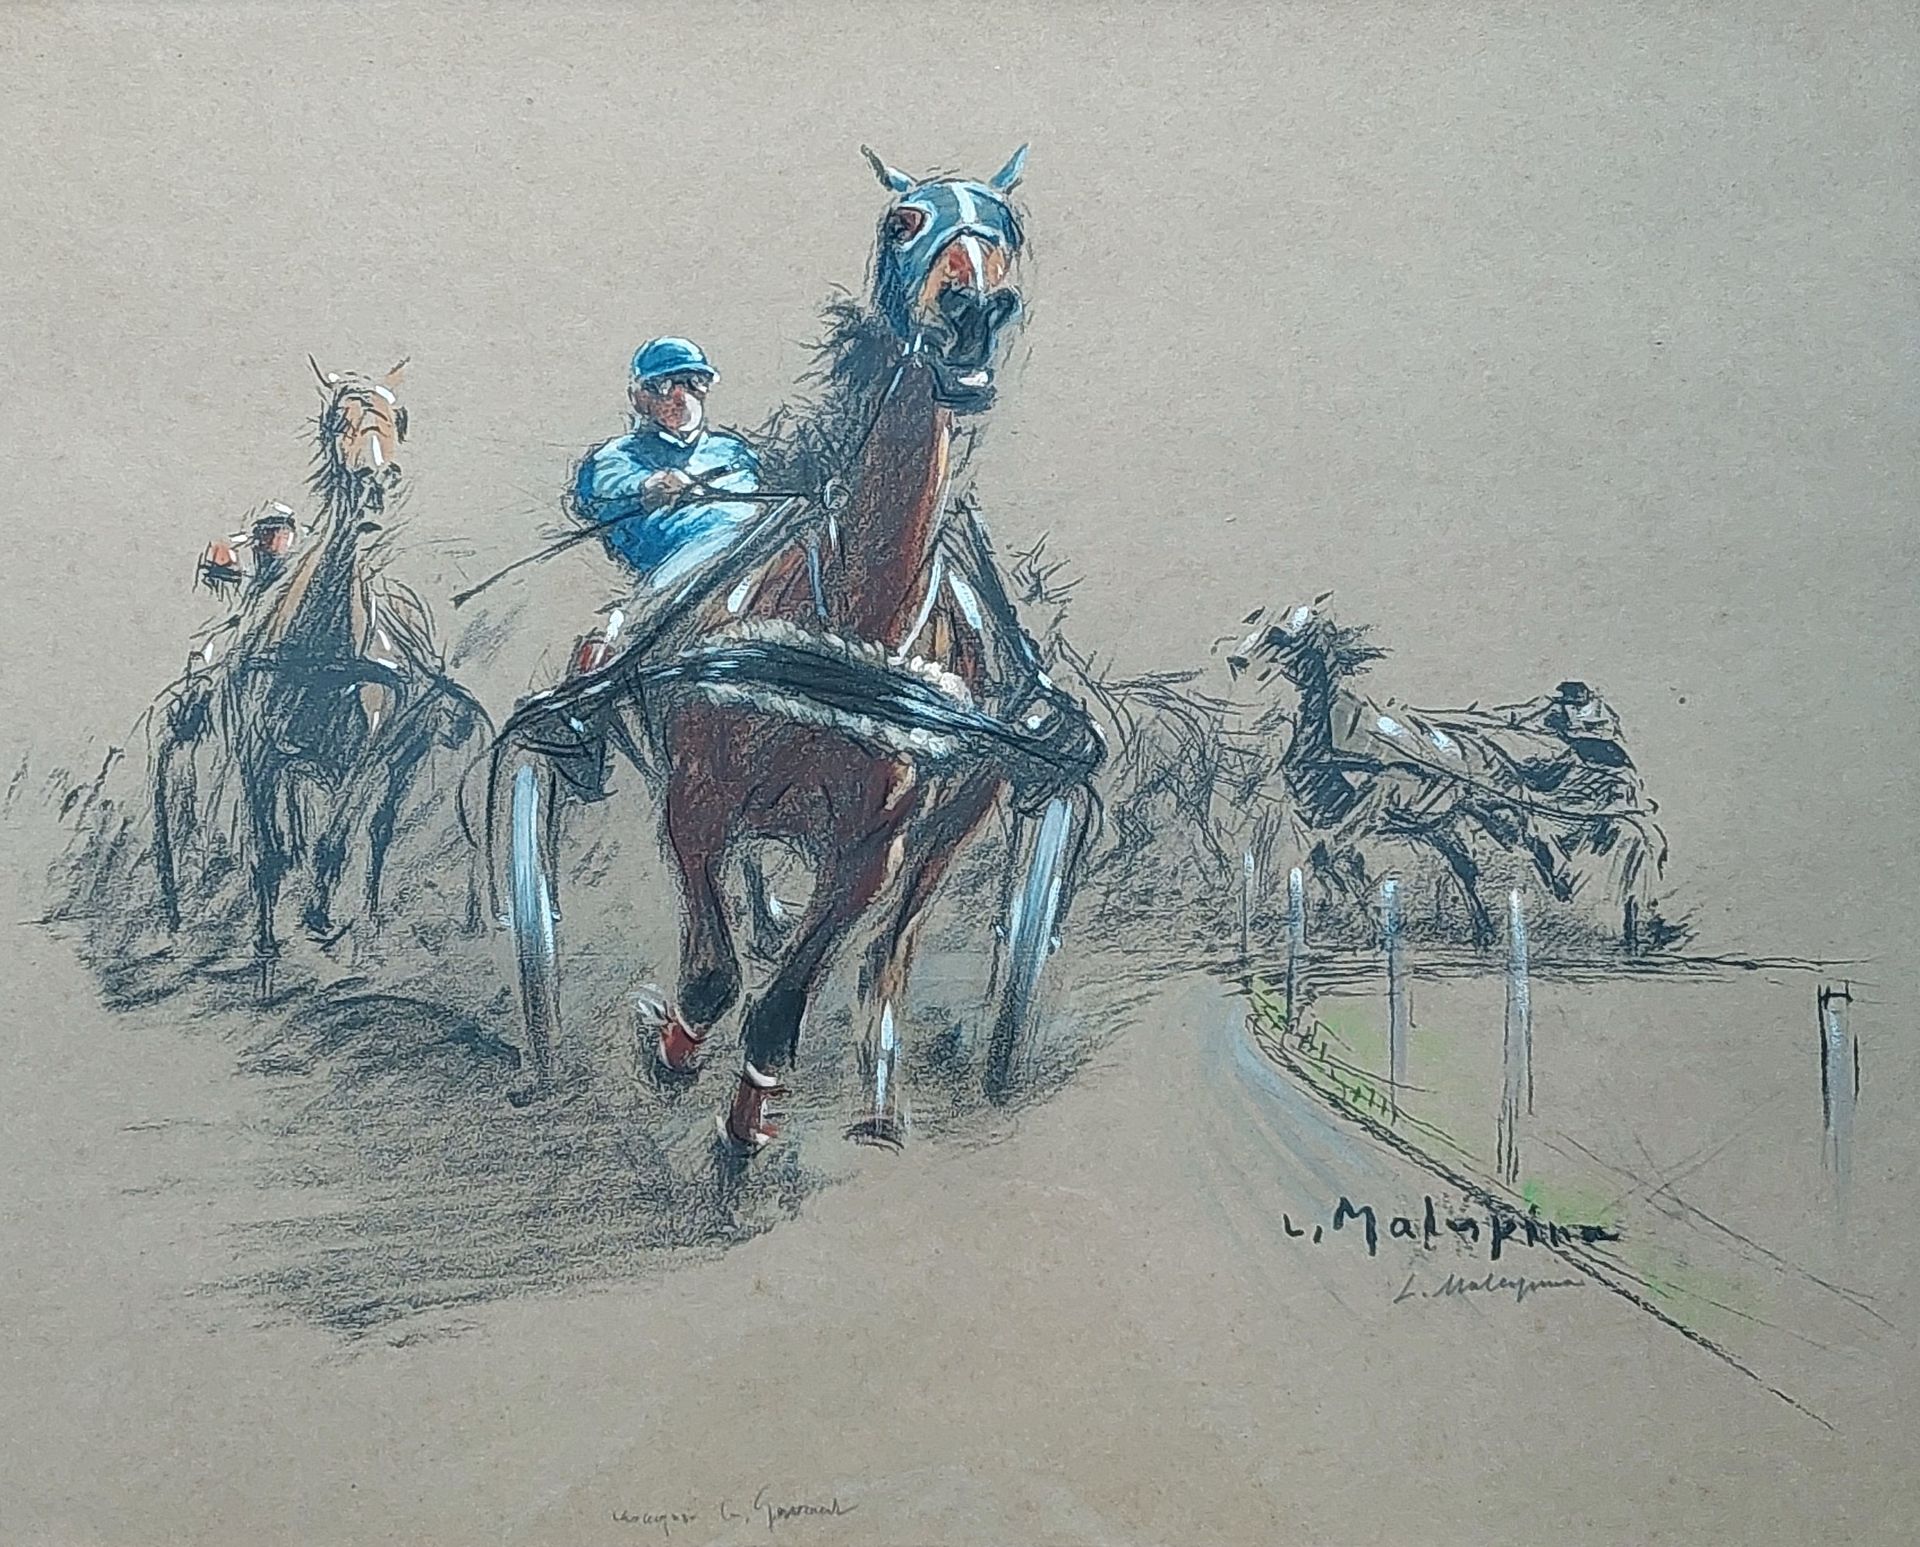 L MALESPINA (1874 - 1940) 
Trotting race . Enhanced engraving 45 x 56 cm at sigh&hellip;